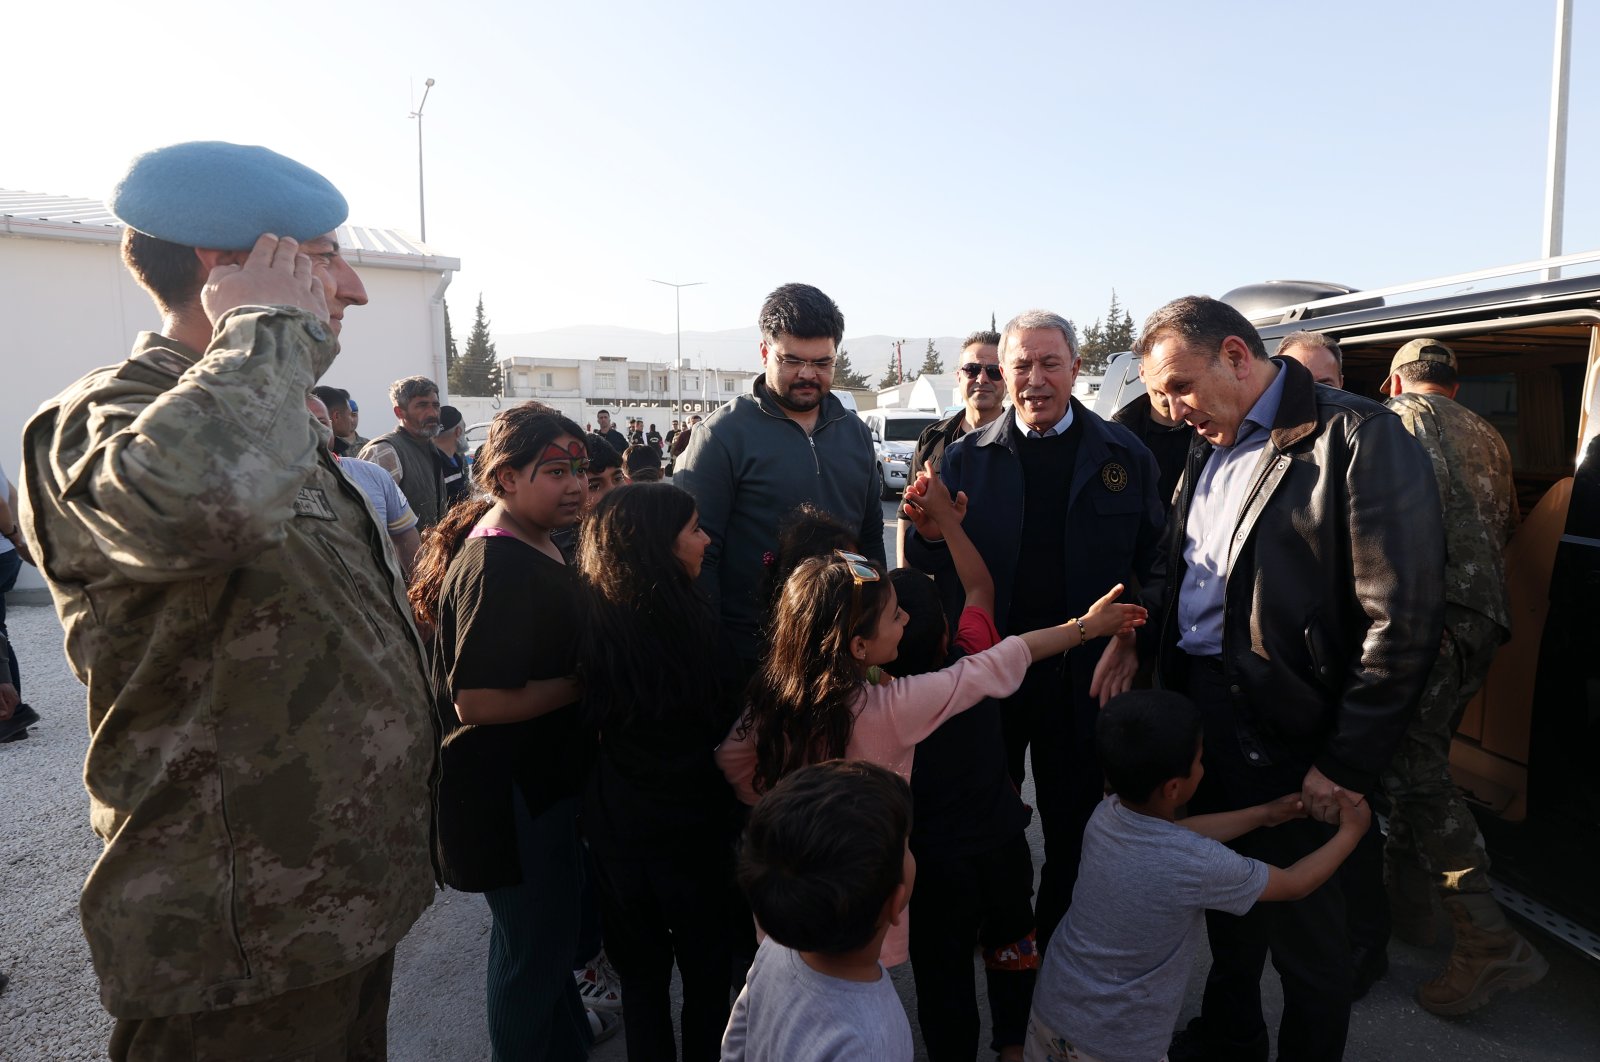 Defense Minister Hulusi Akar and his Greek counterpart Nikos Panagiotopoulos visit a container city in the earthquake-stricken Hatay province, Türkiye, April 4, 2023. (AA Photo)